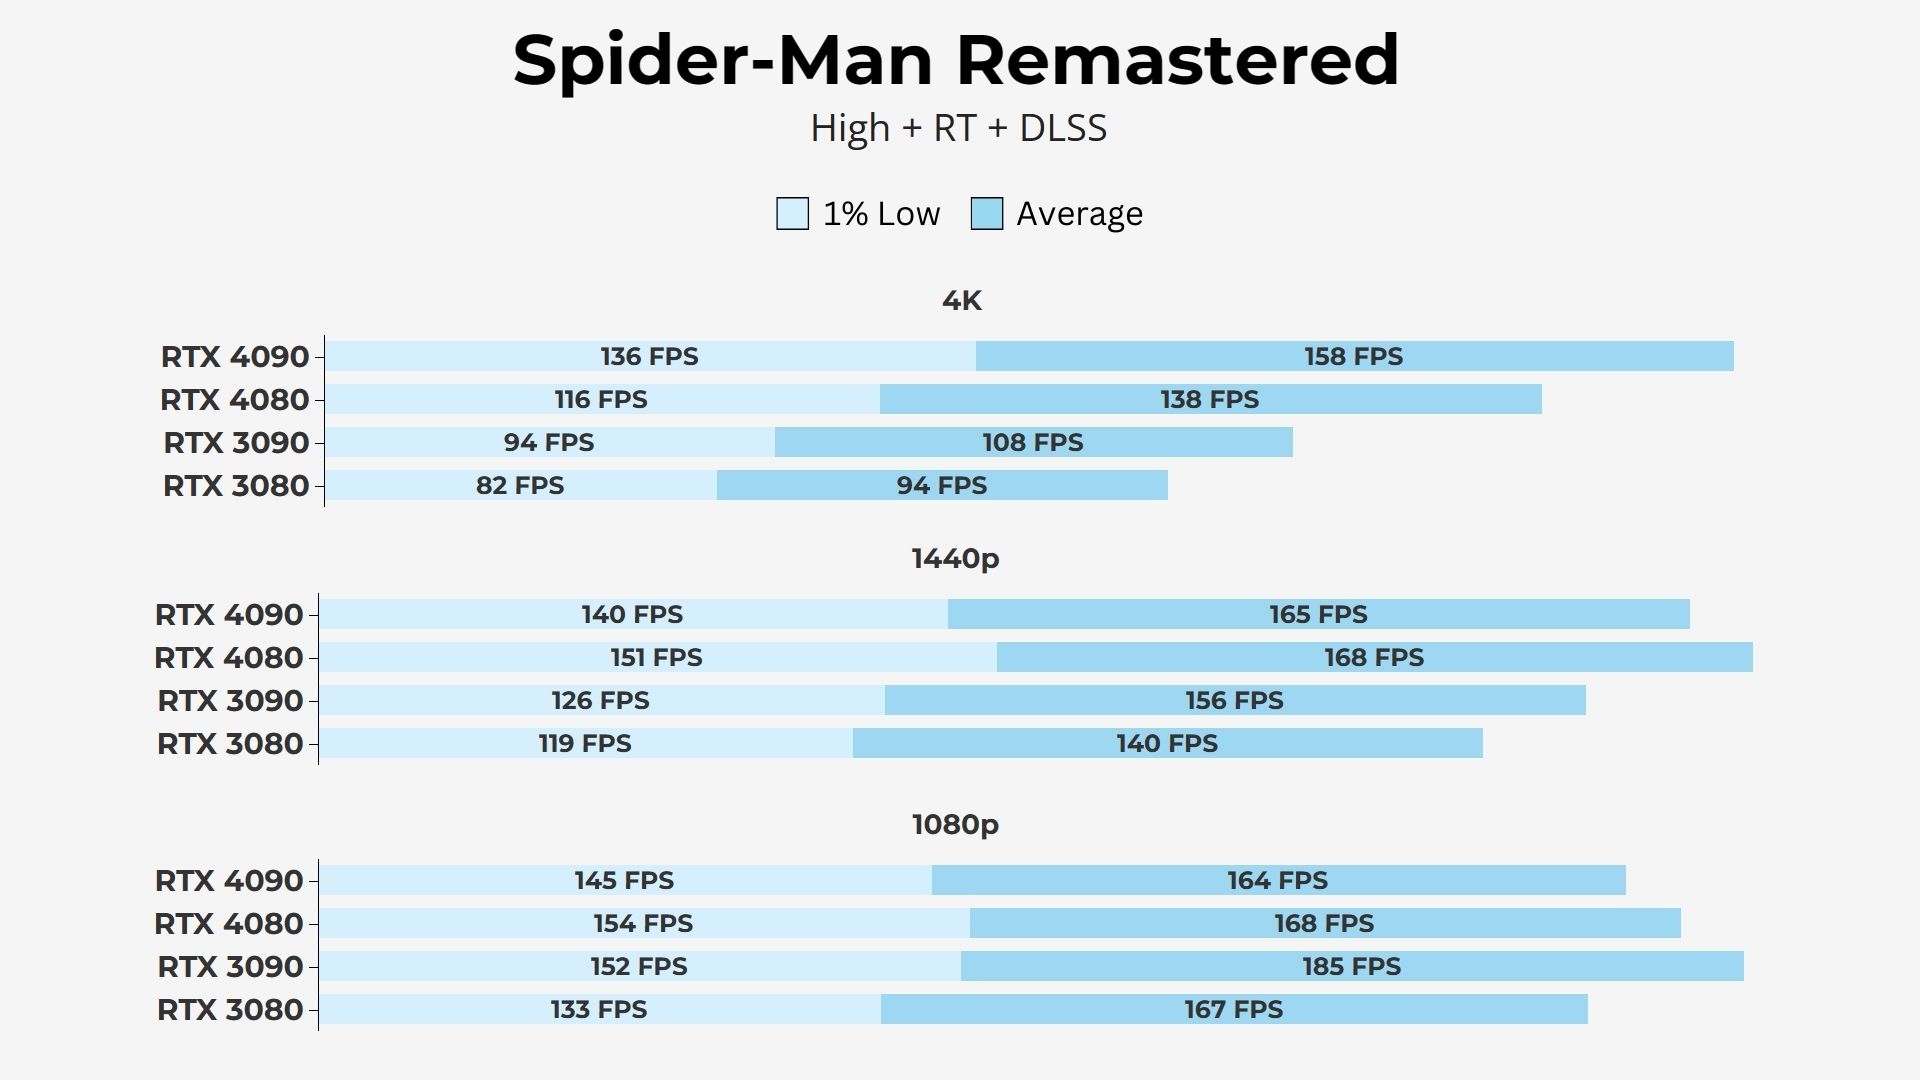 RTX 4080 Ray Tracing + DLSS Enabled Results Spiderman